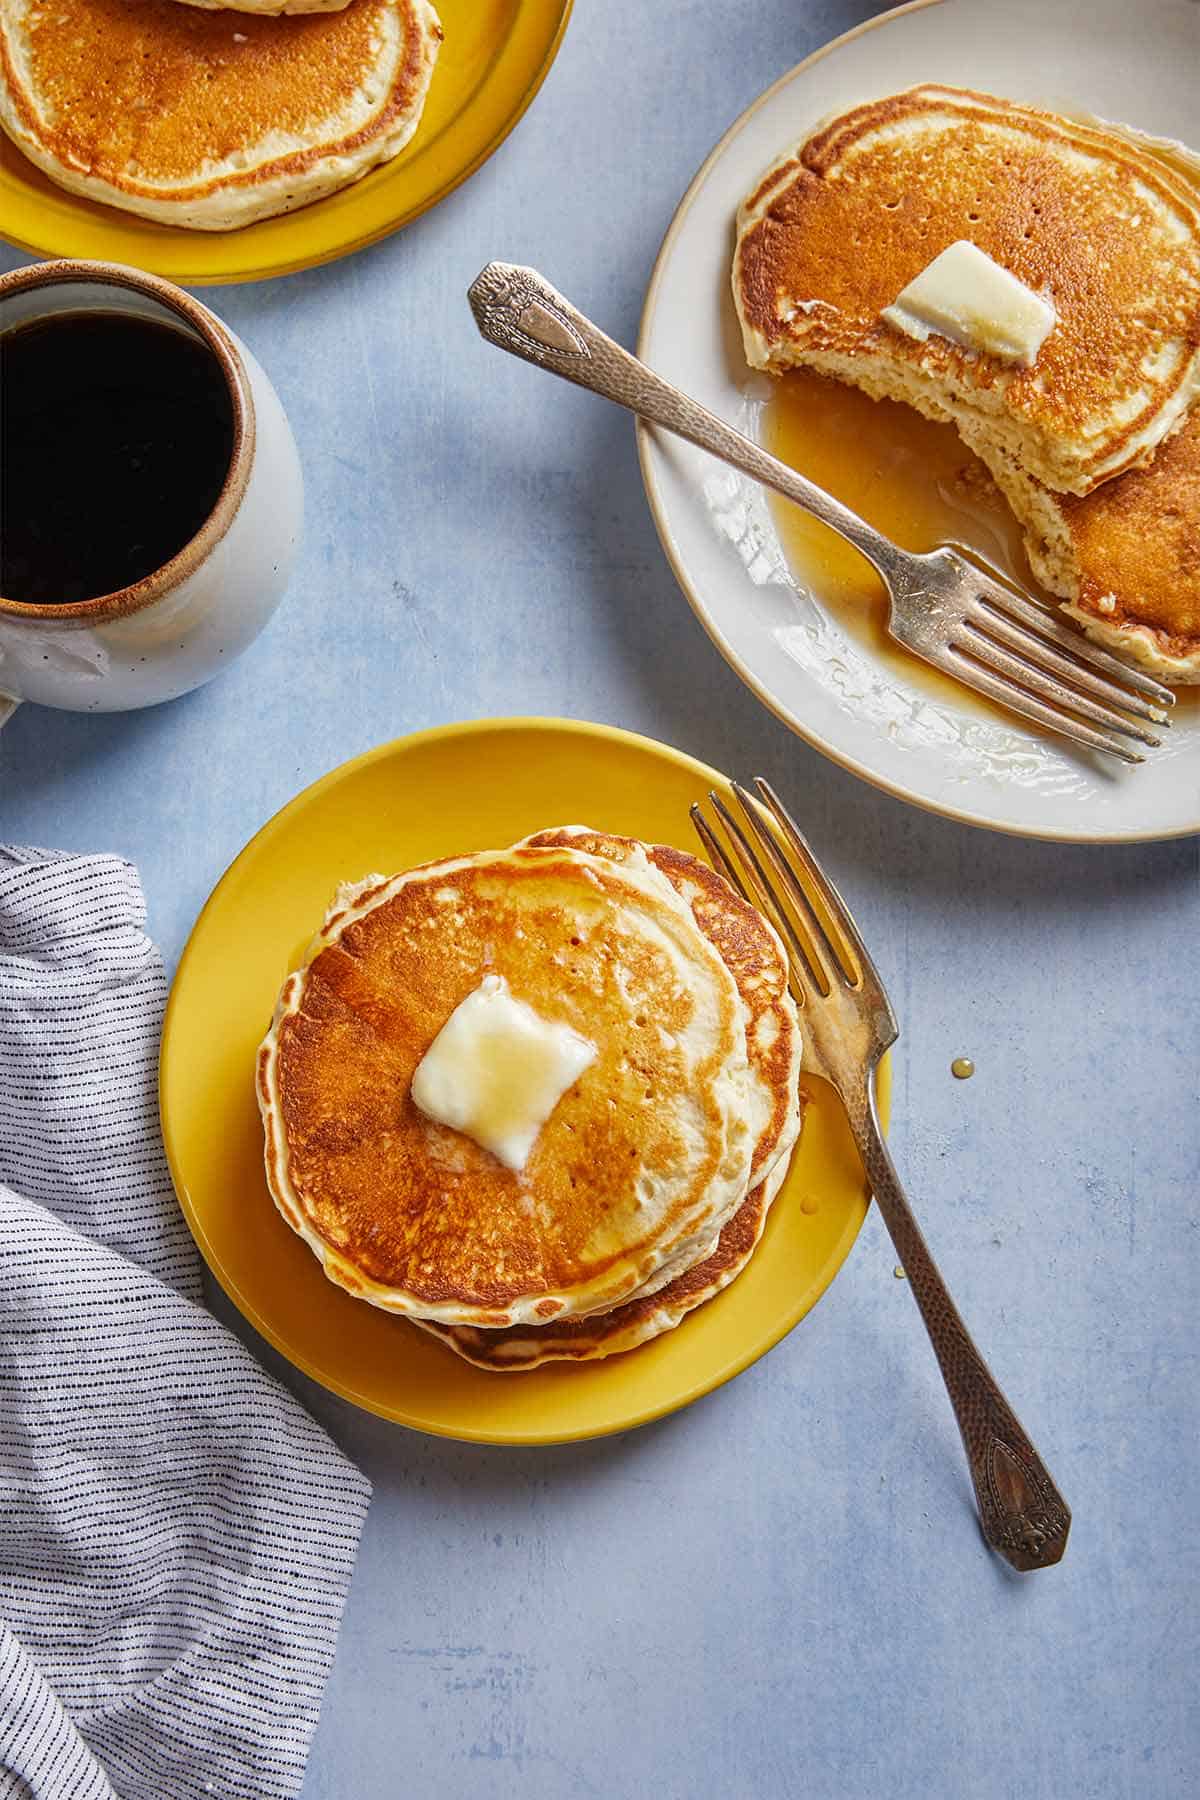 A tall stack of fluffy pancakes on a plate with a fork next to it.